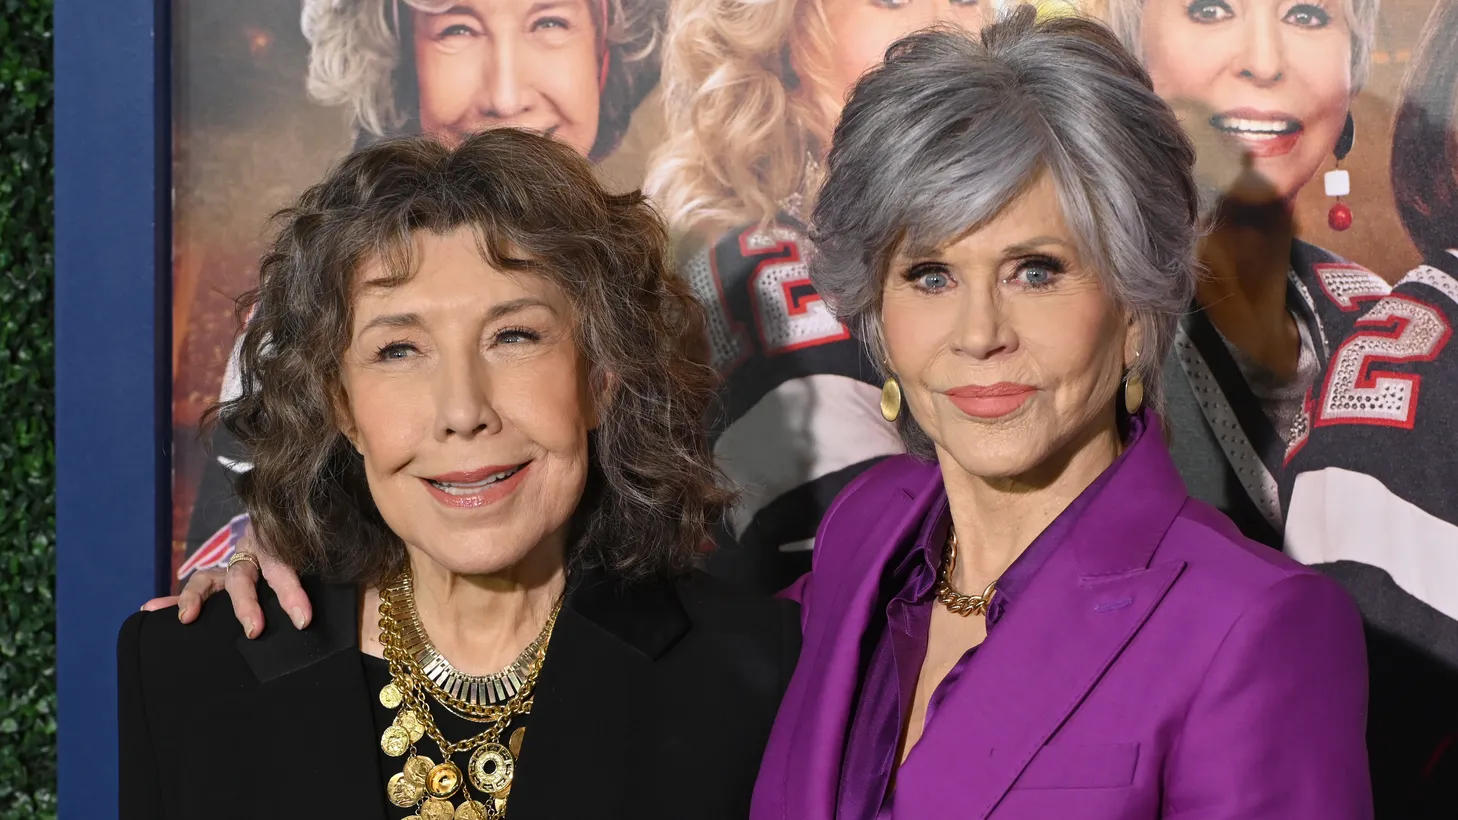 Lily Tomlin (L) and Jane Fonda (R) attend the premiere for "80 for Brady" at the Regency Village Theatre, Westwood, CA, January 31, 2023.